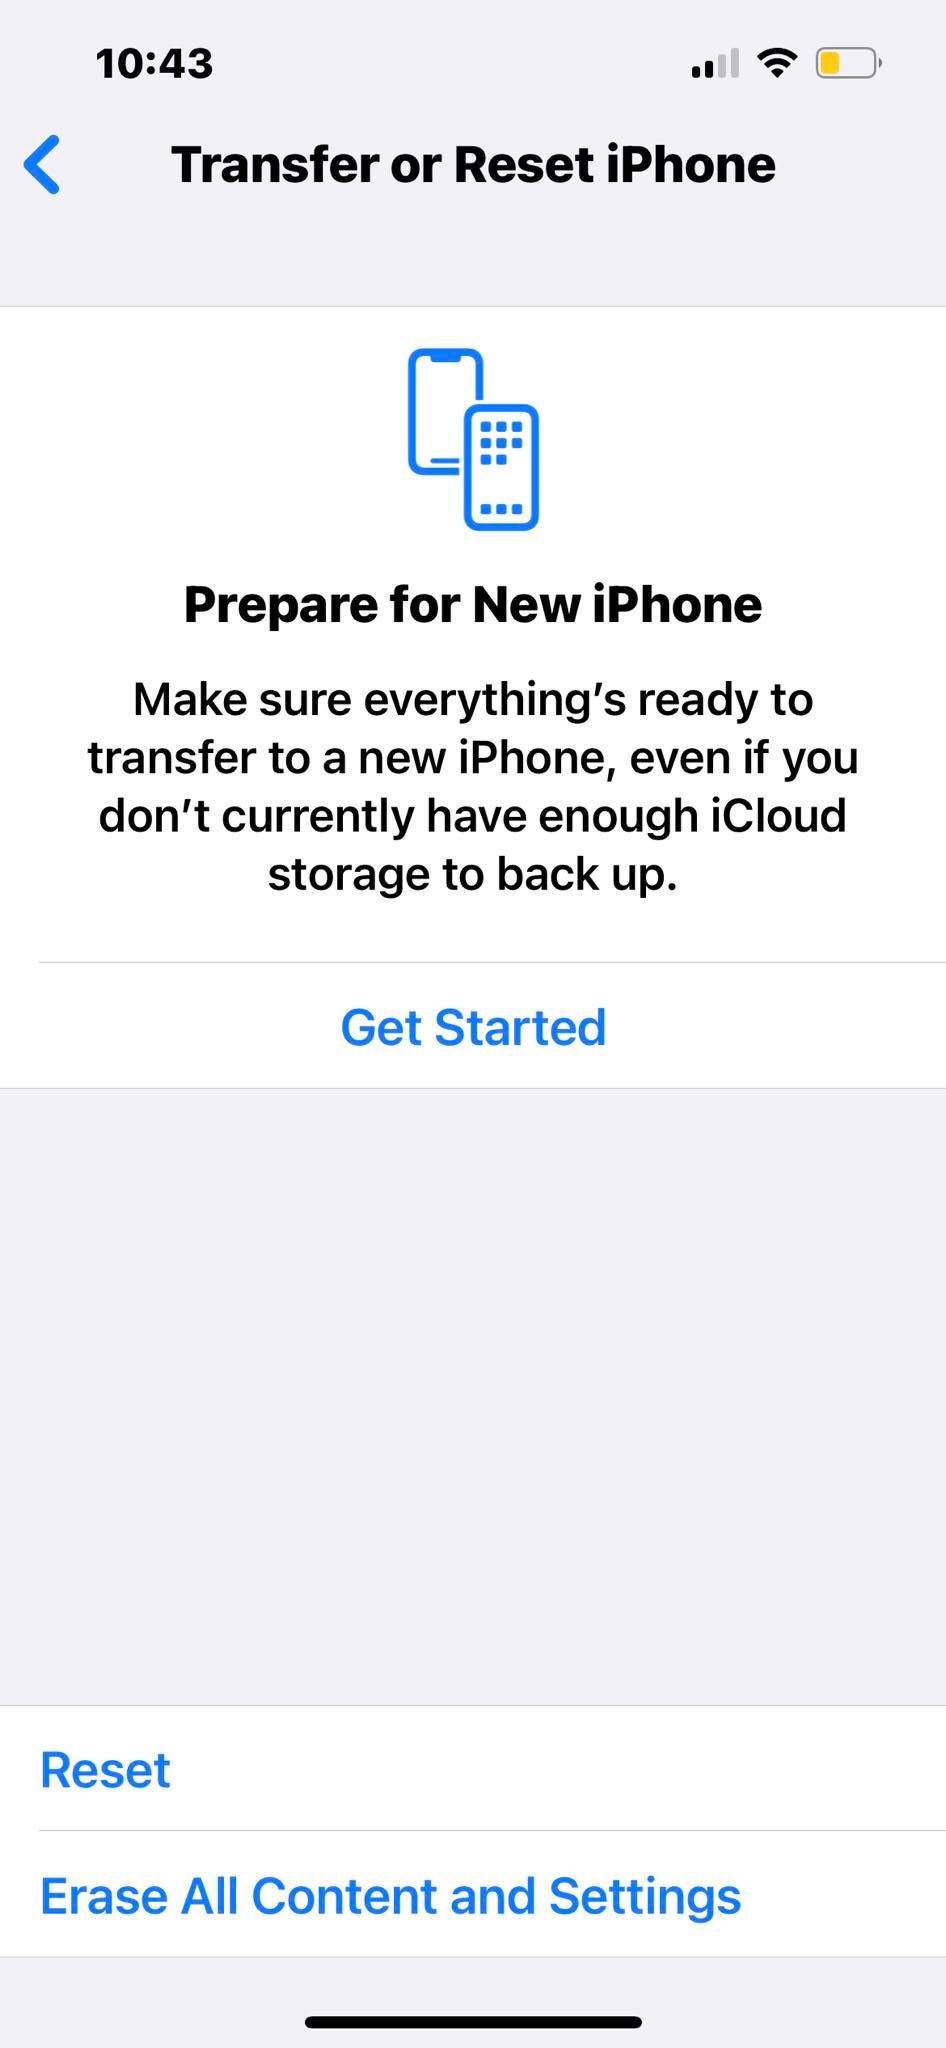 Options for Transferring or Resetting iPhone Data